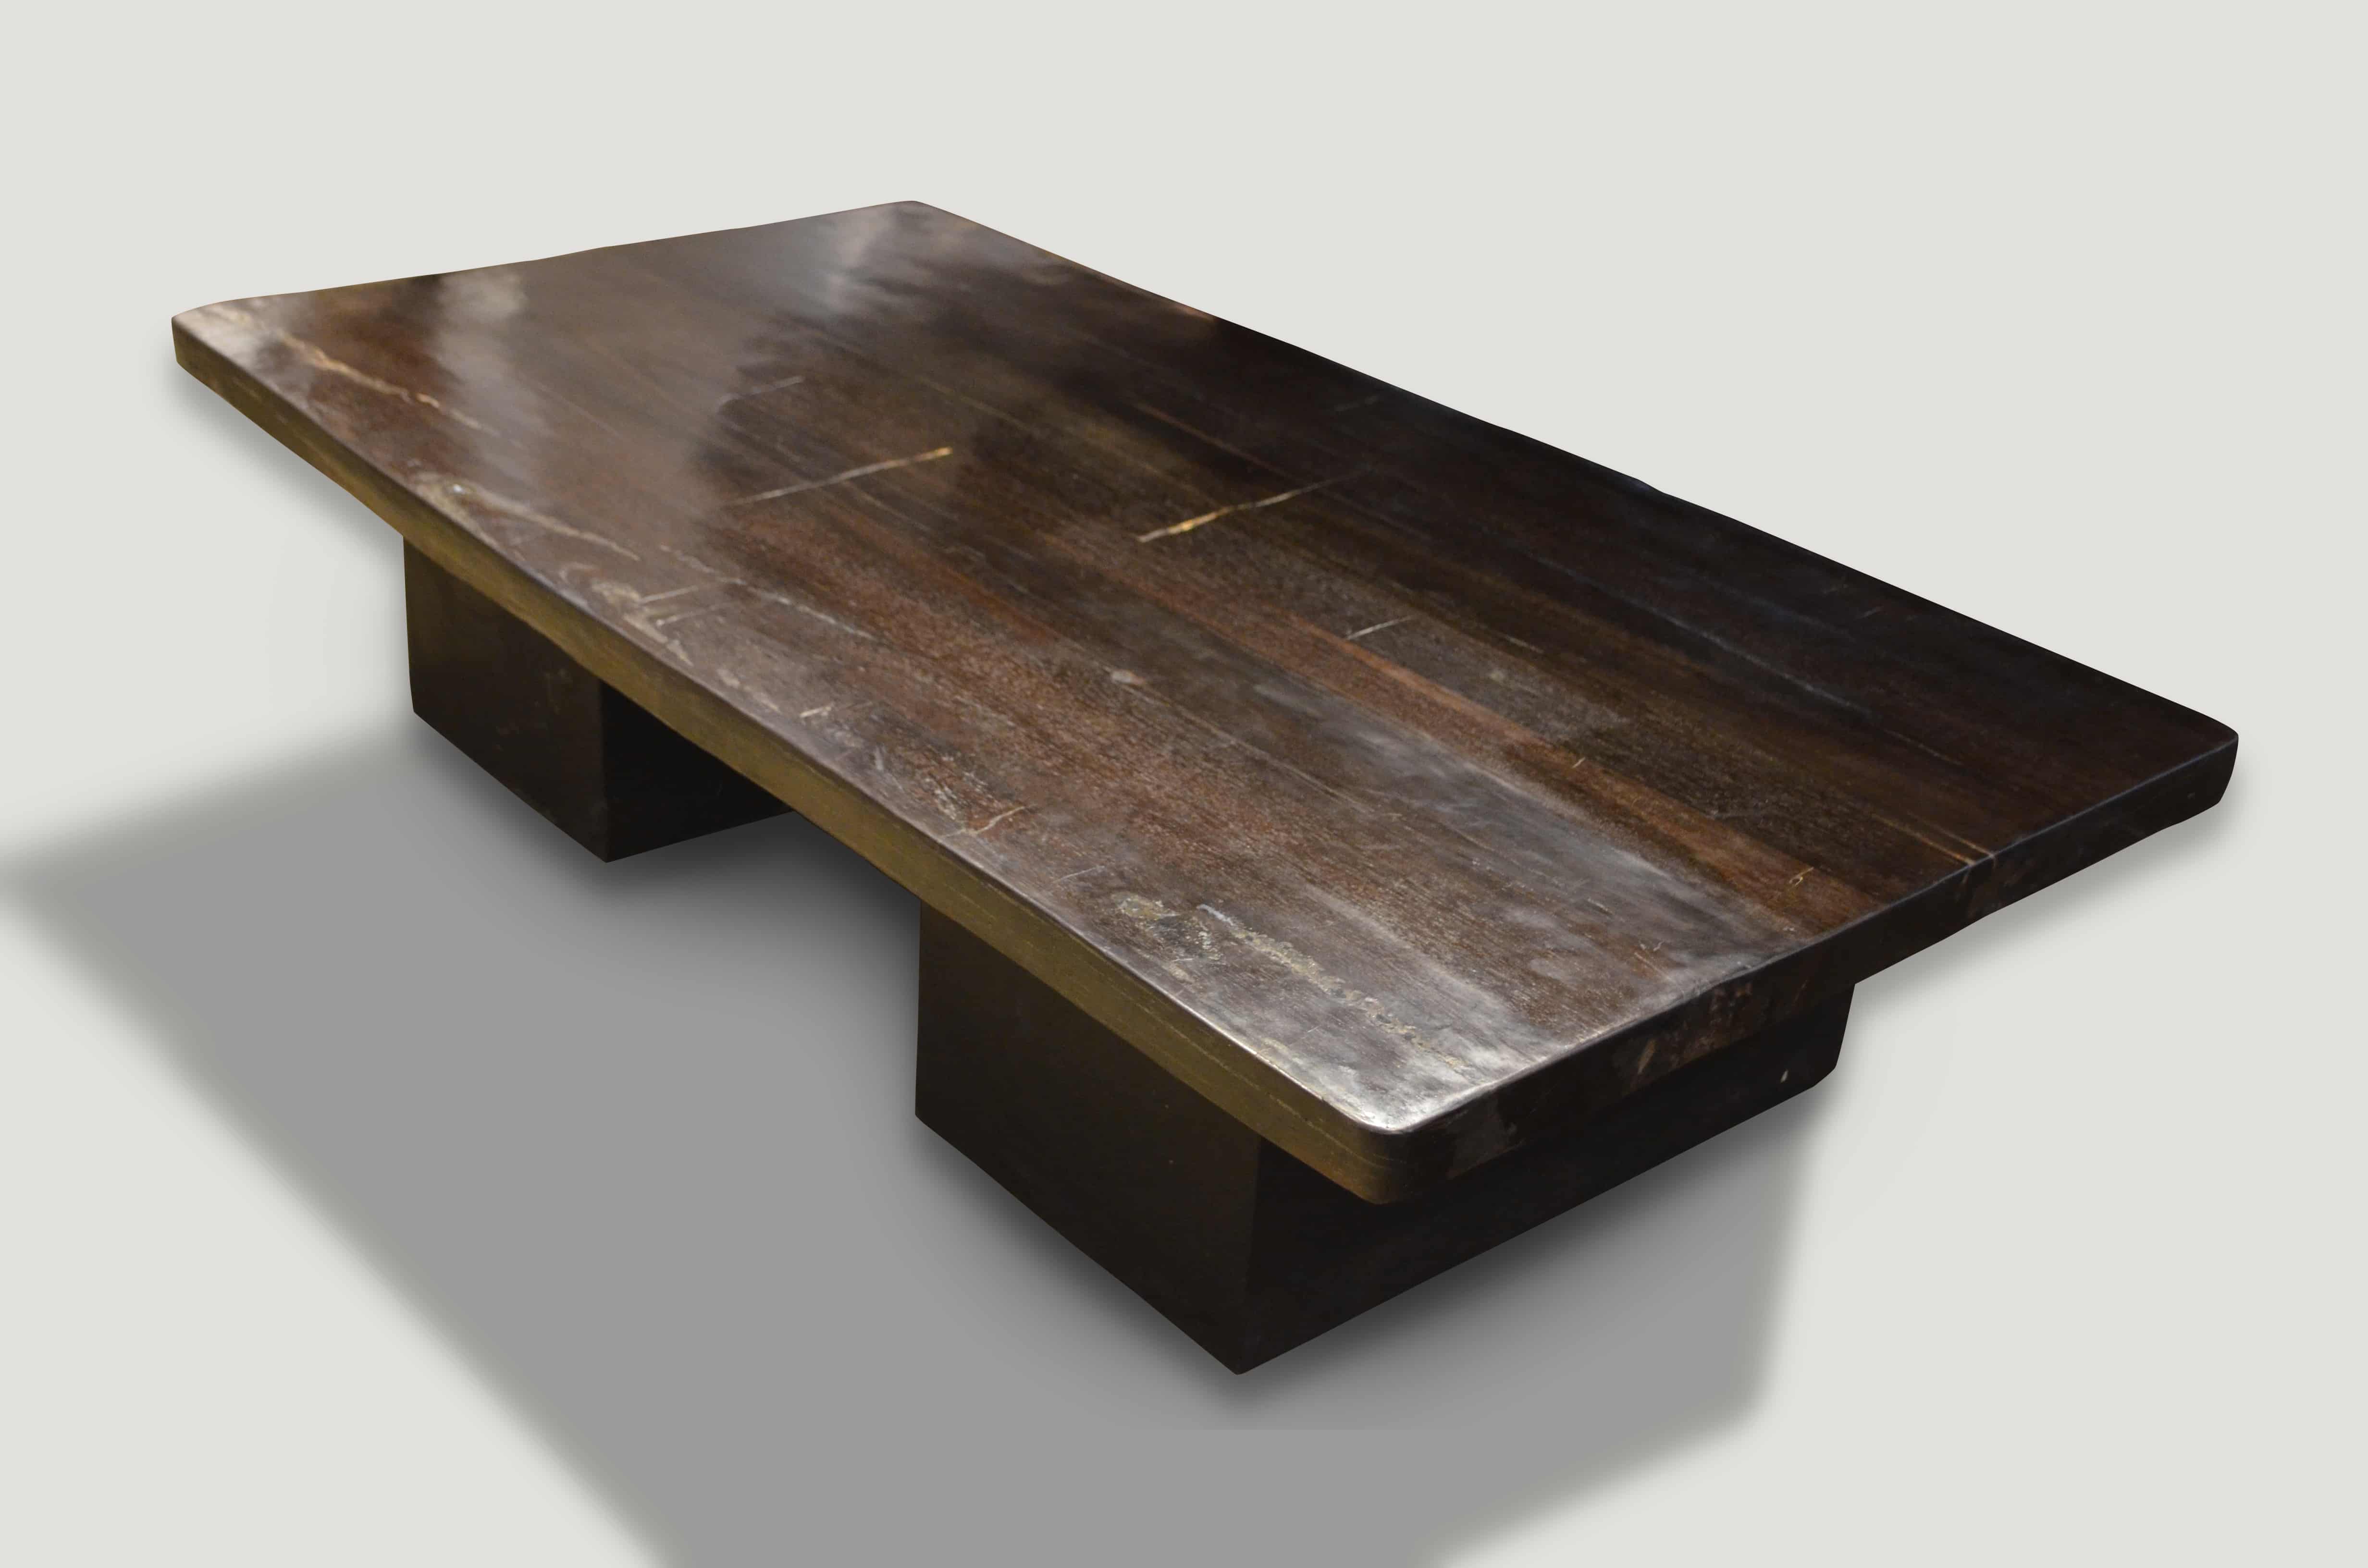 SUPER SMOOTH PETRIFIED WOOD COFFEE TABLE